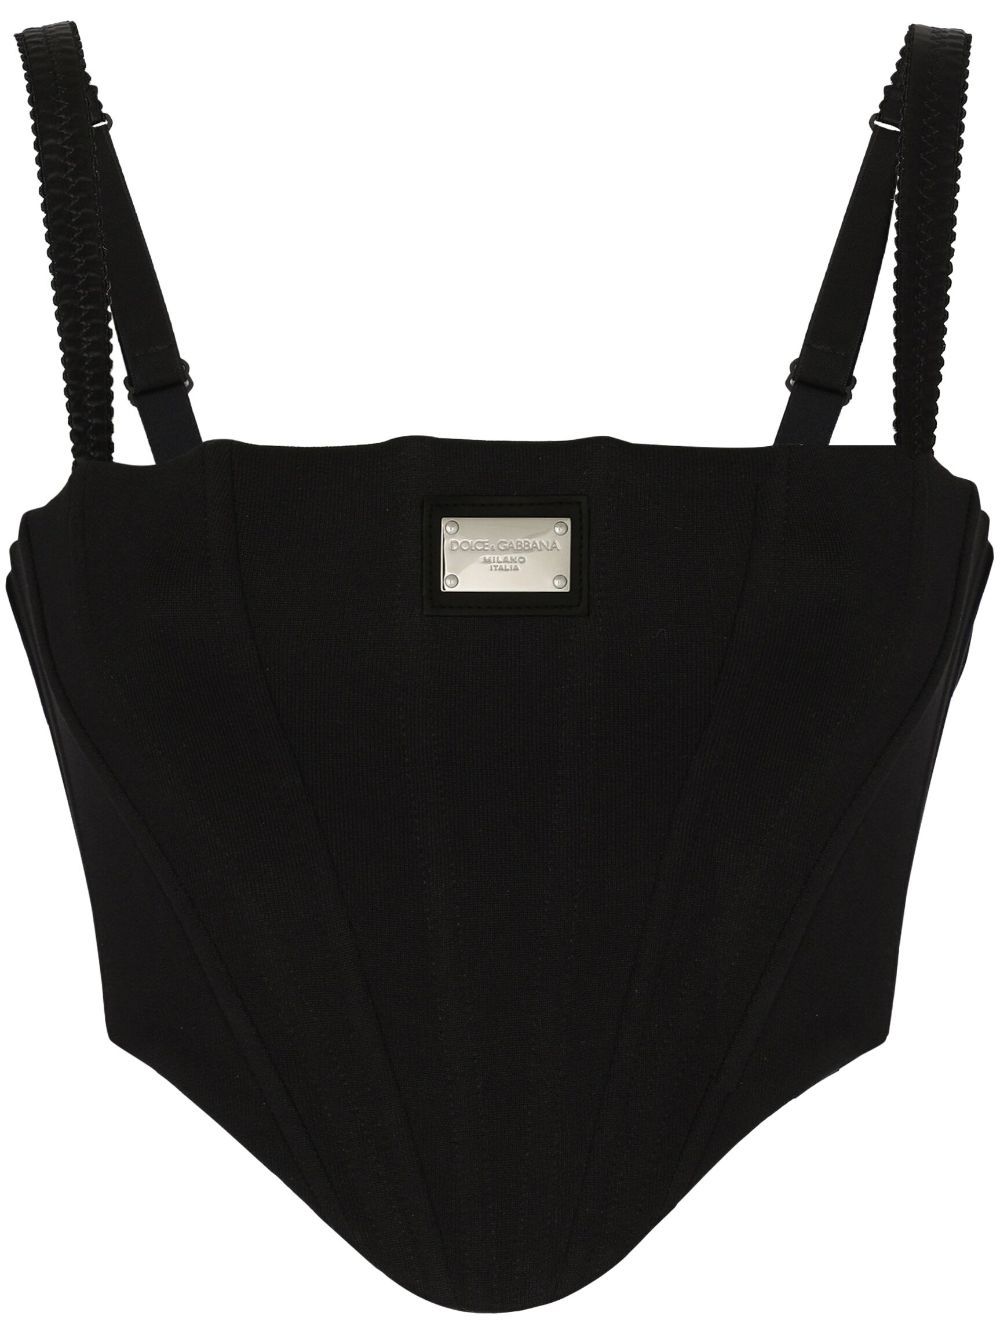 DOLCE & GABBANA LOGO-PLAQUE CROPPED BUSTIER TOP